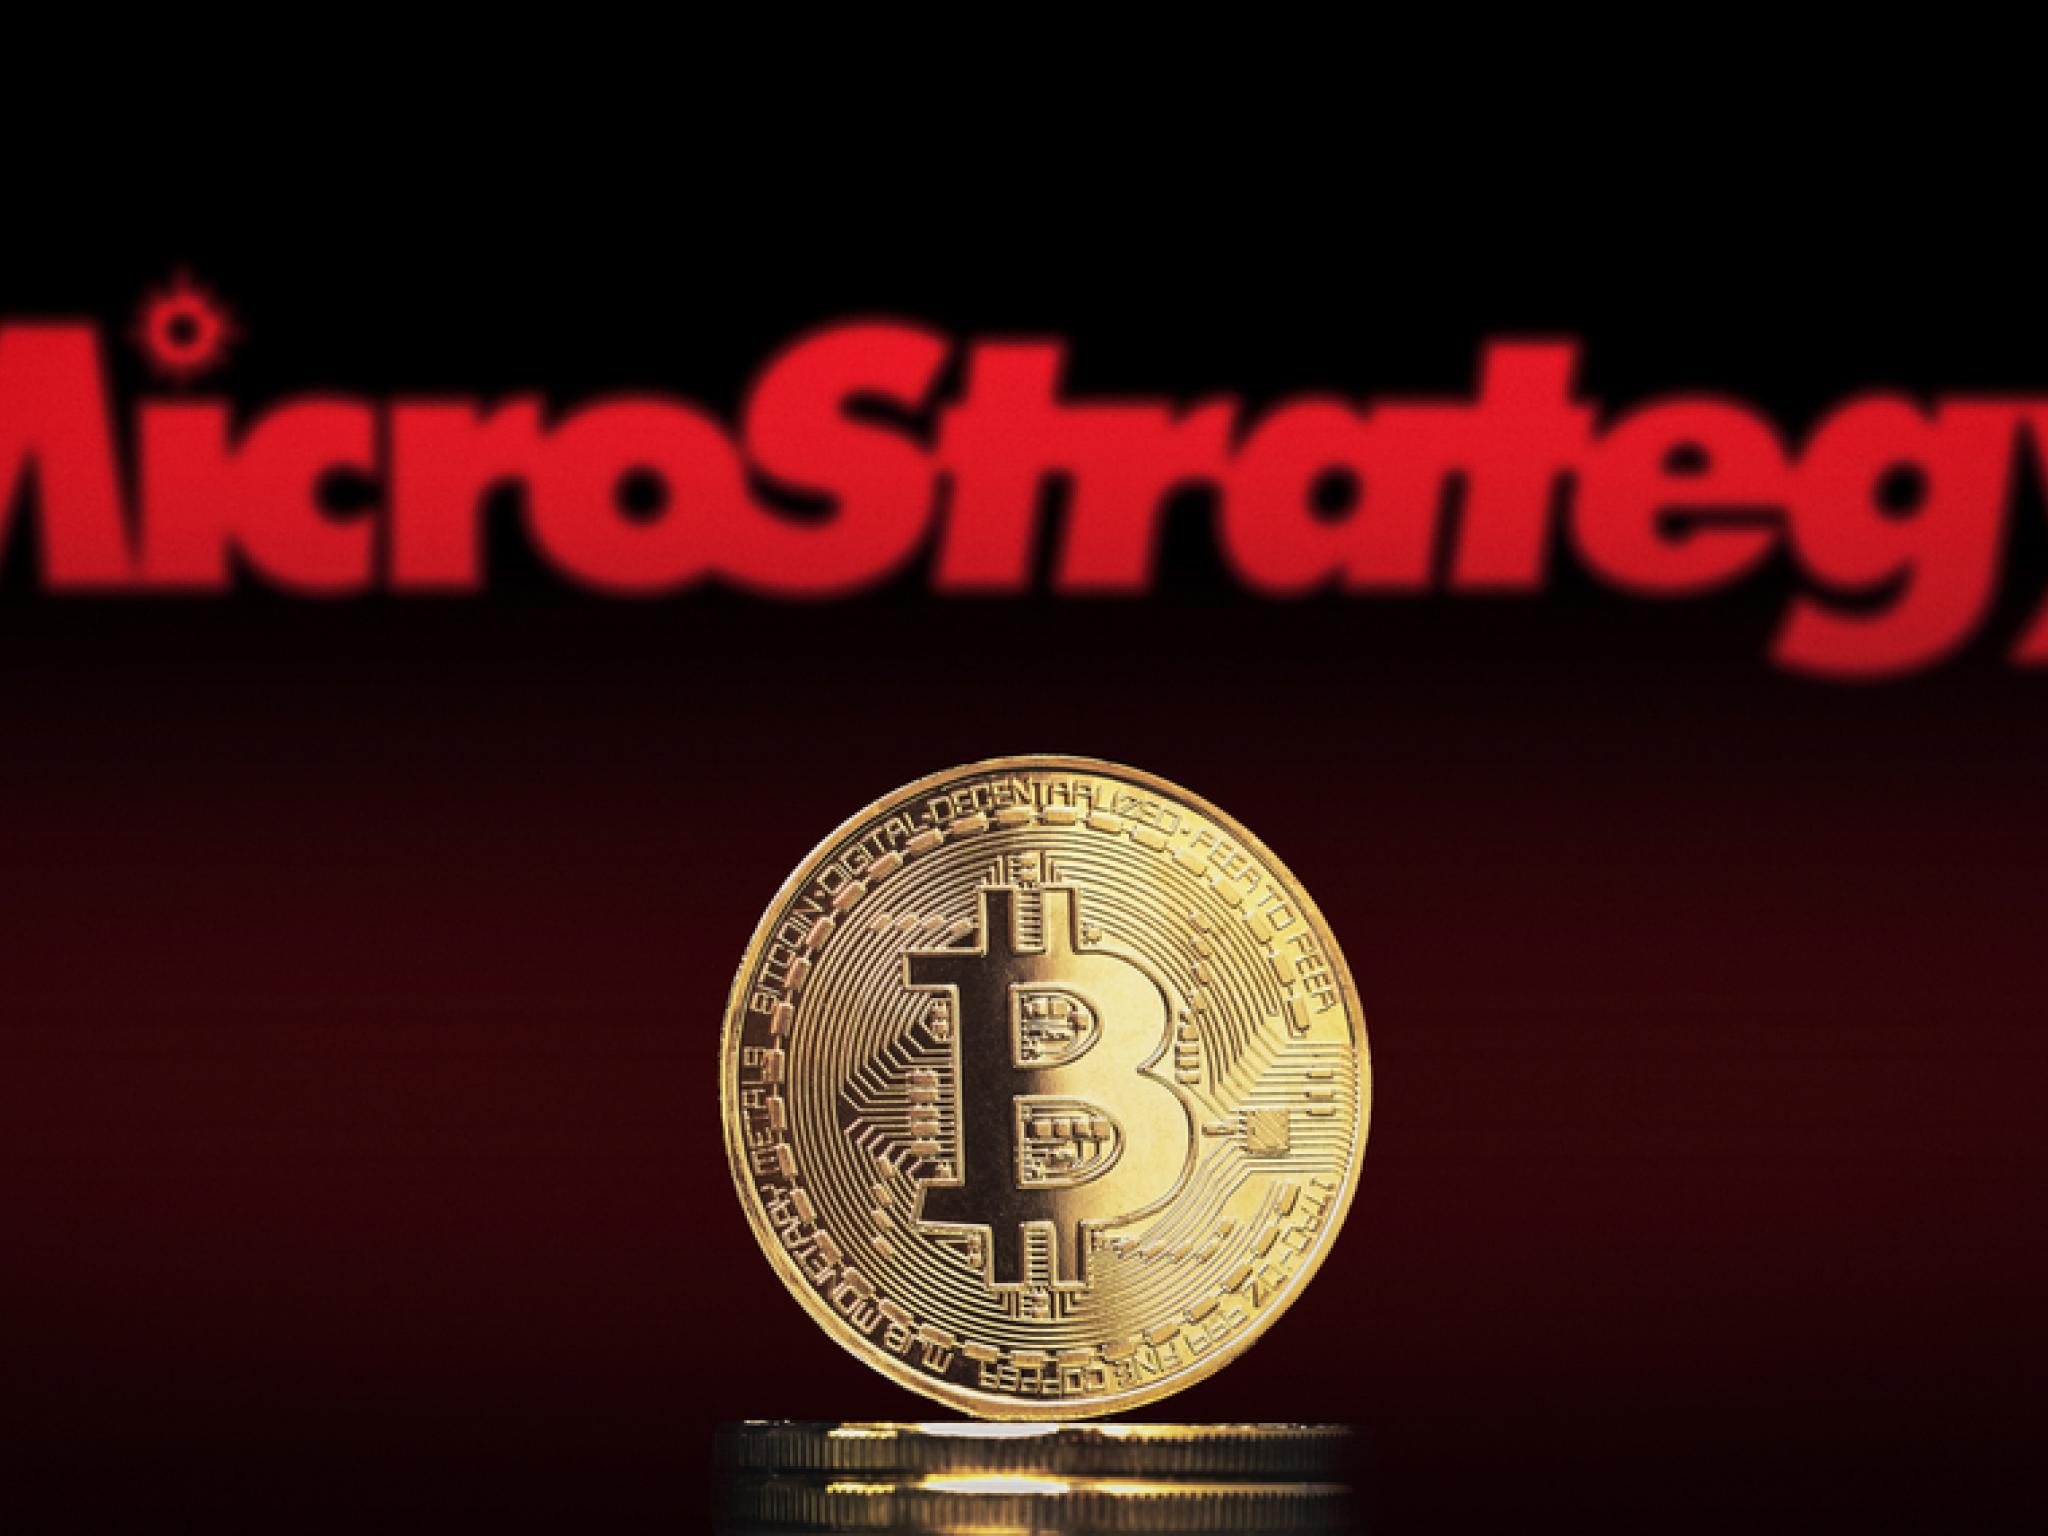  microstrategy-shares-look-overvalued-by-26-it-is-time-to-take-profit-says-analyst-who-saw-bitcoin-rally 